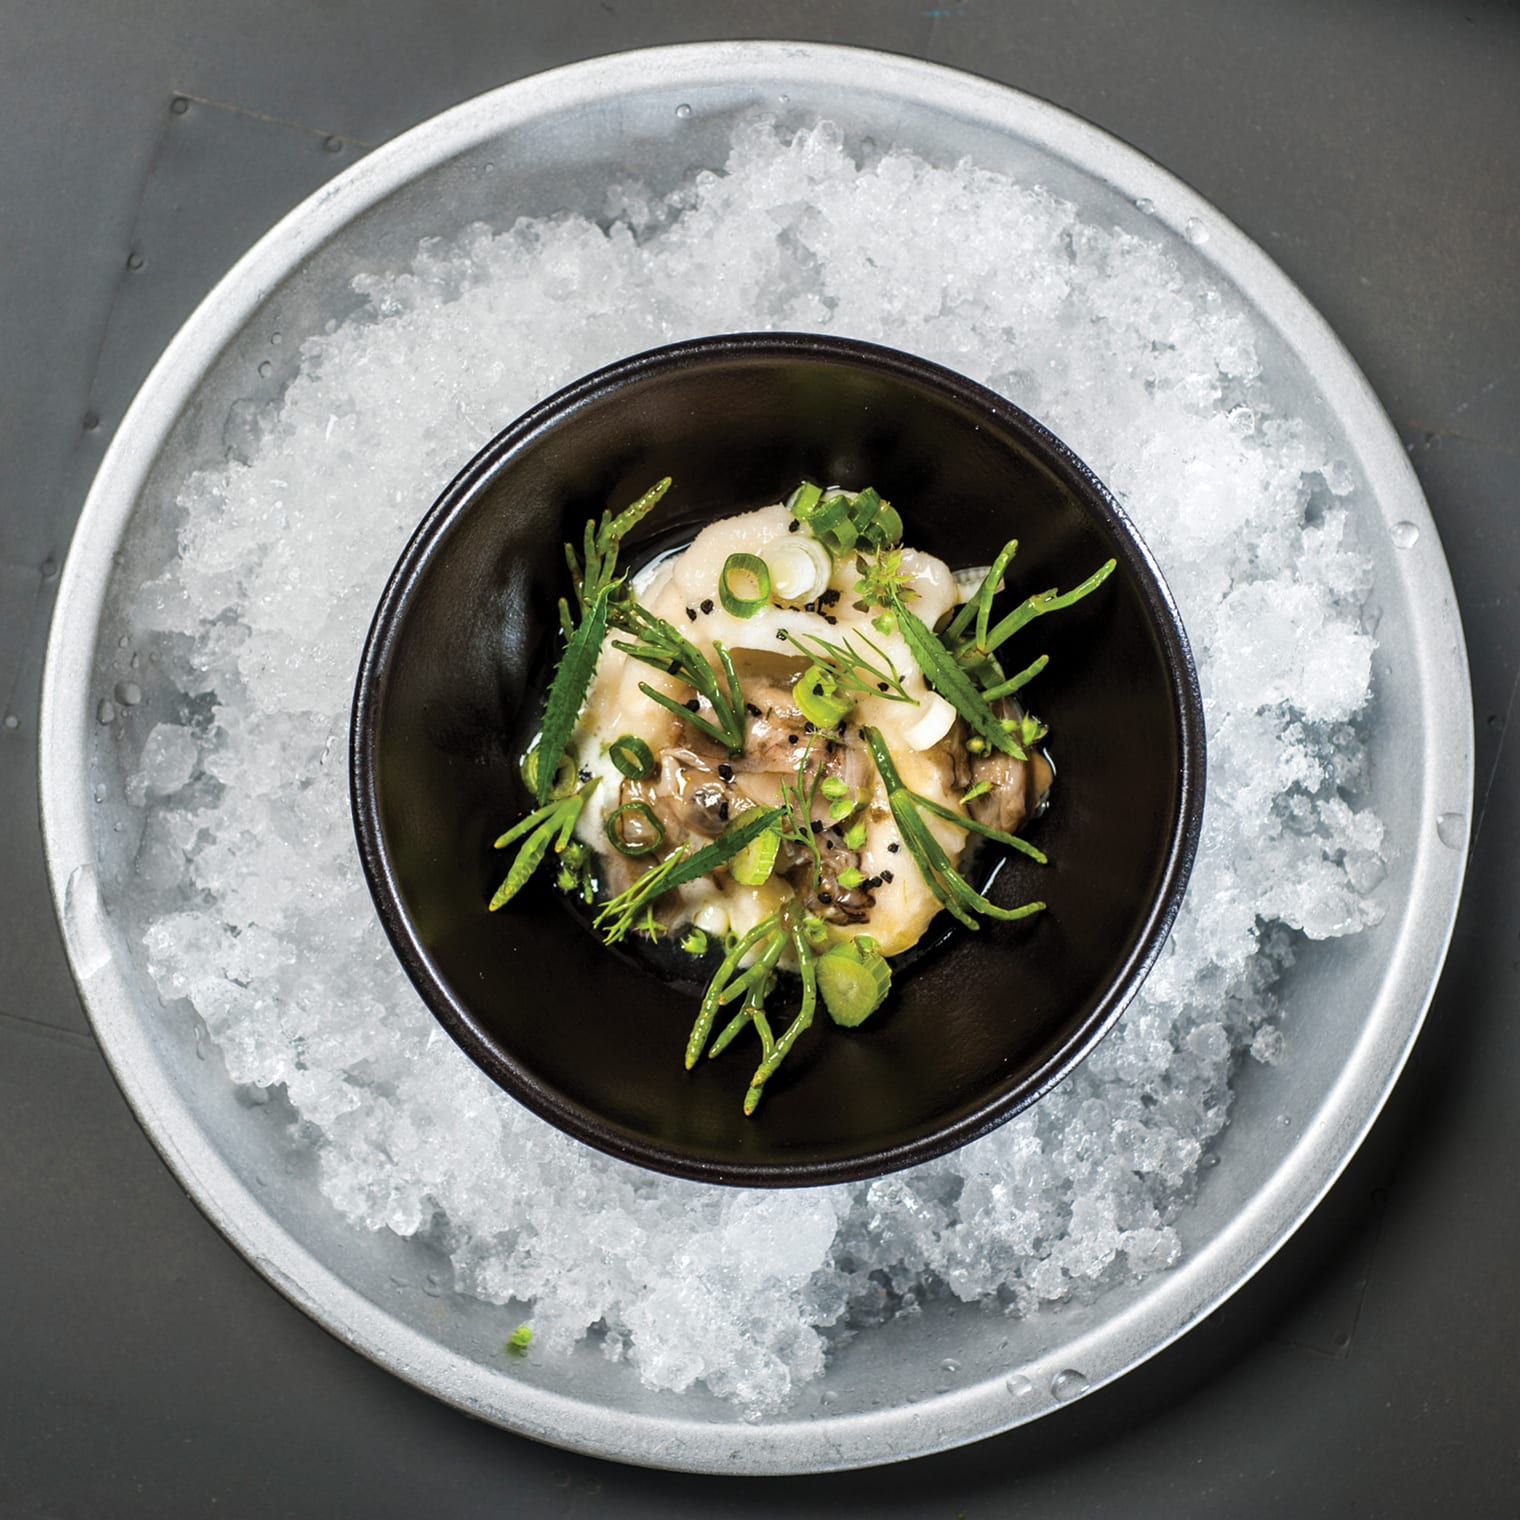 Oysters-over-Fennel-and-Sea-Salt-Sorbet-with-North-Carolina-Sea-Beans-and-Onion.jpg